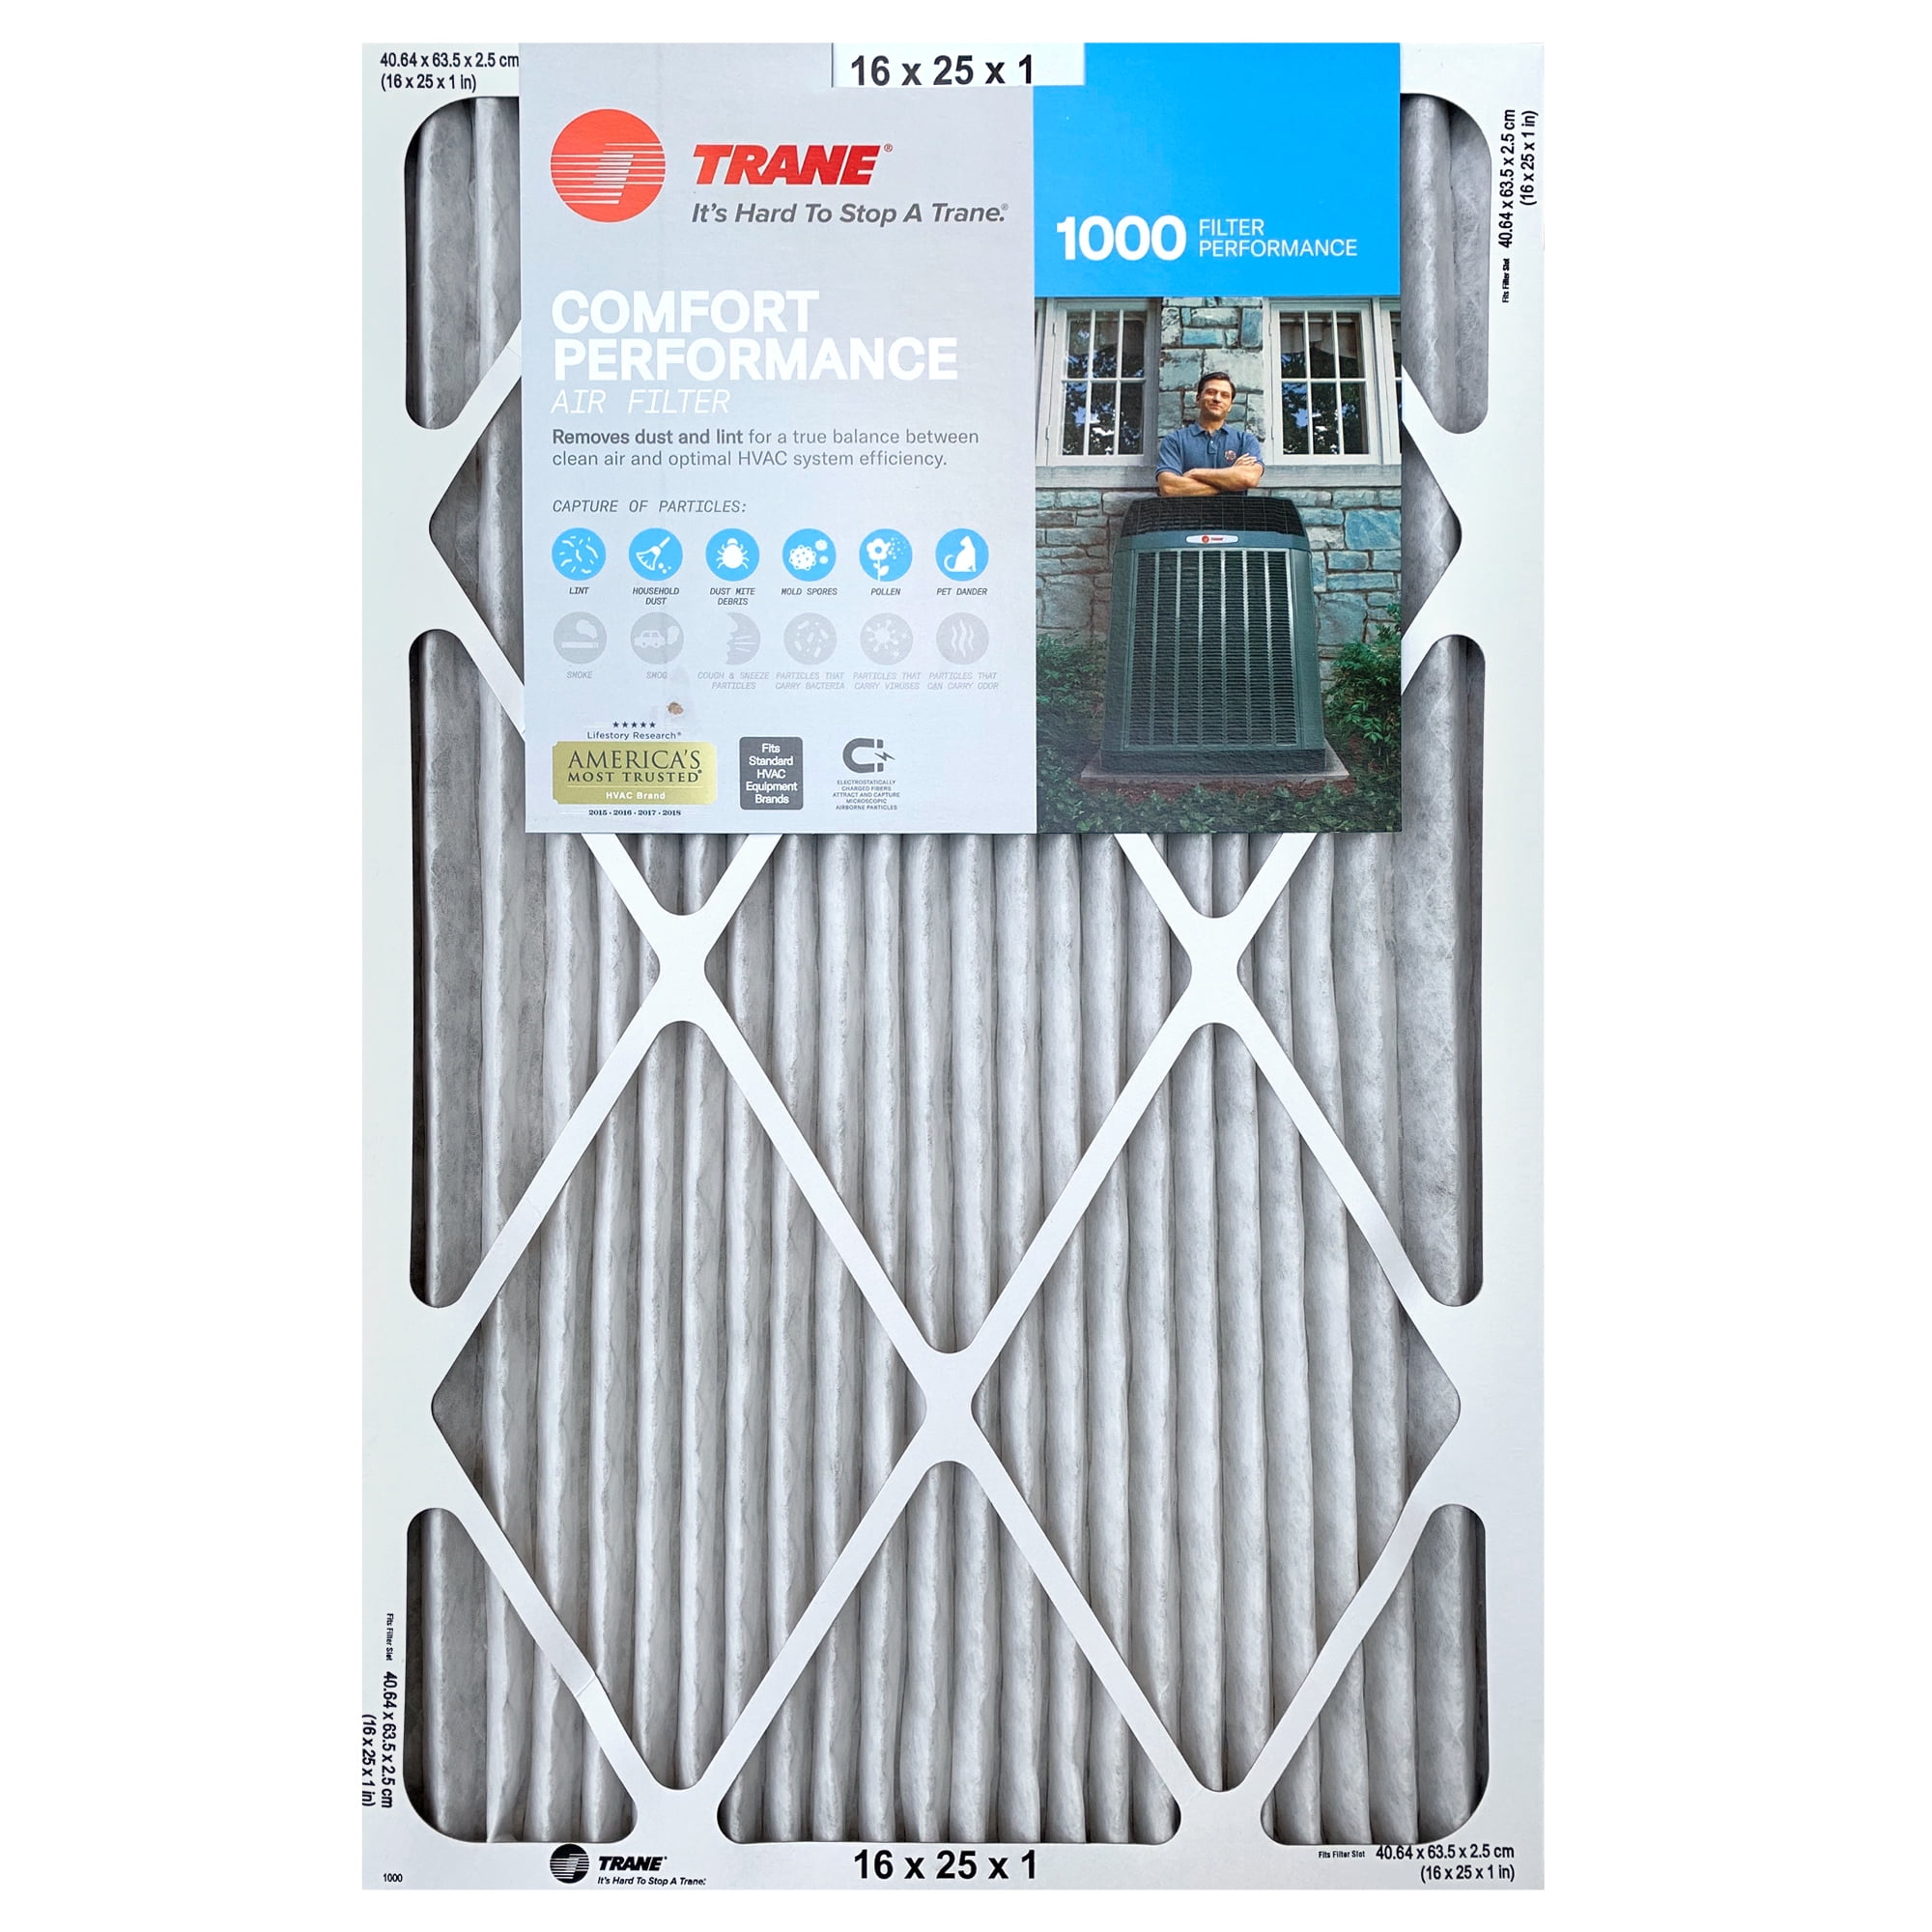 Redesigned for 2016 by Trane Trane Ductulator